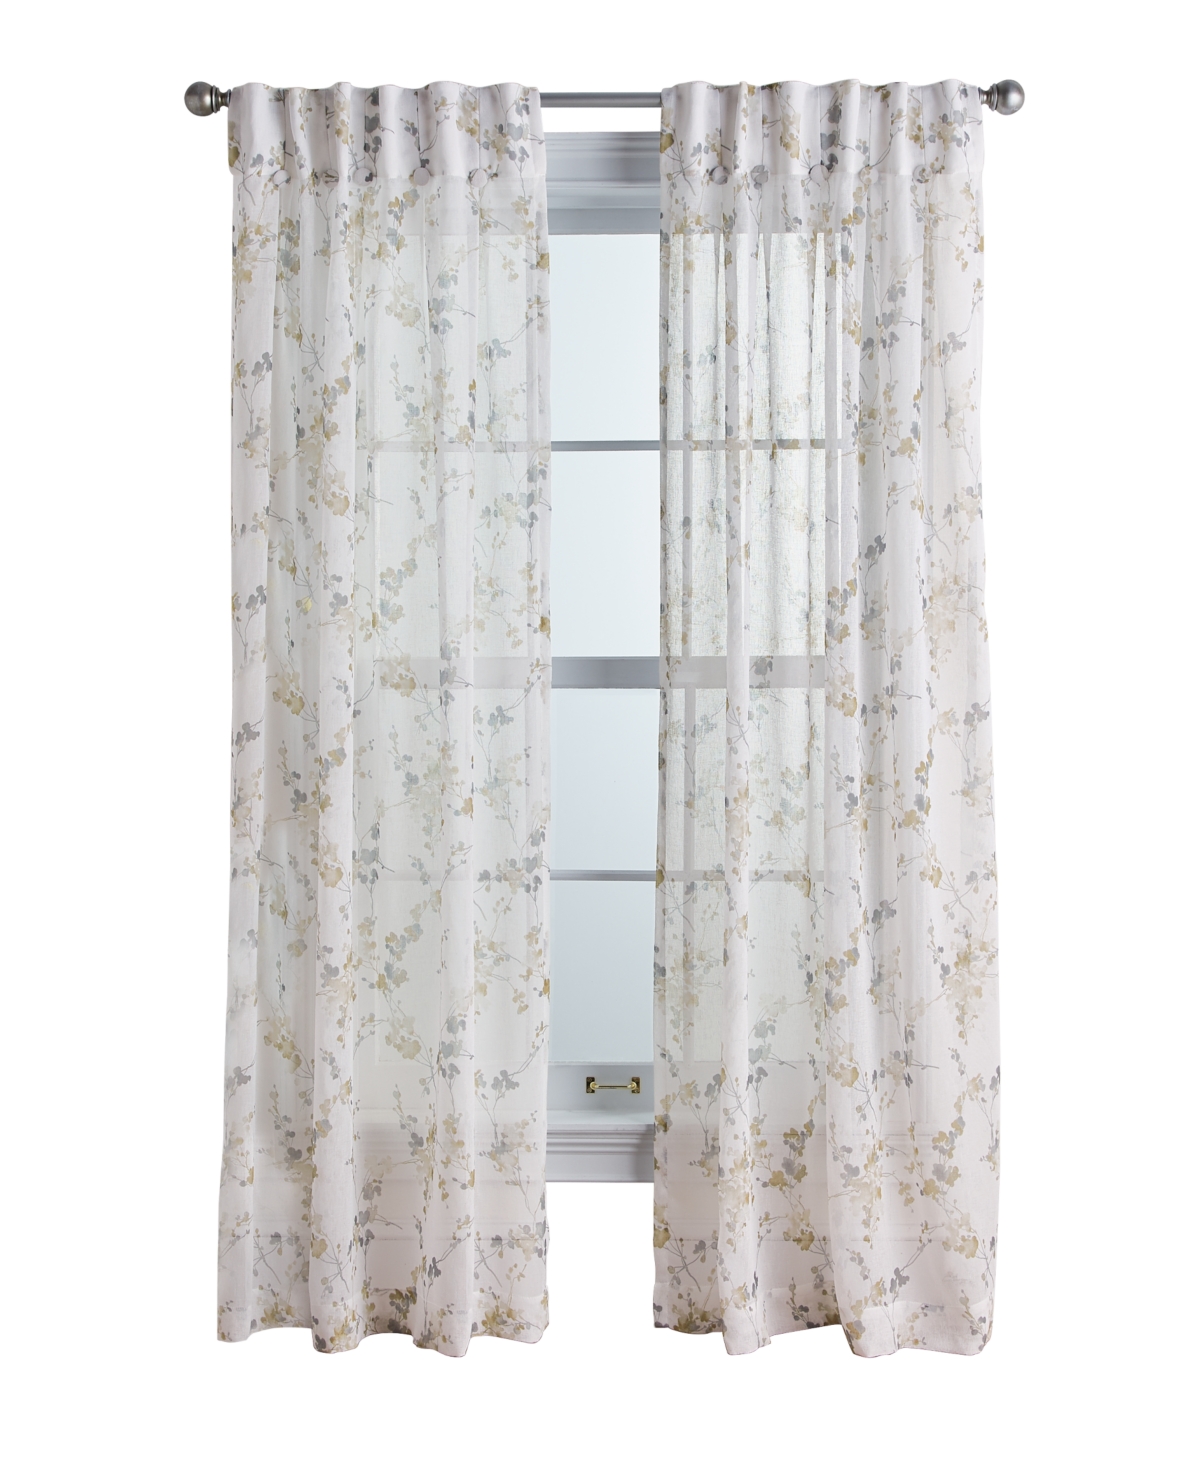 DKNY WALLFLOWER SHEER INVERTED PLEAT WITH BUTTON 2 PIECE WINDOW PANEL, 96" X 32"